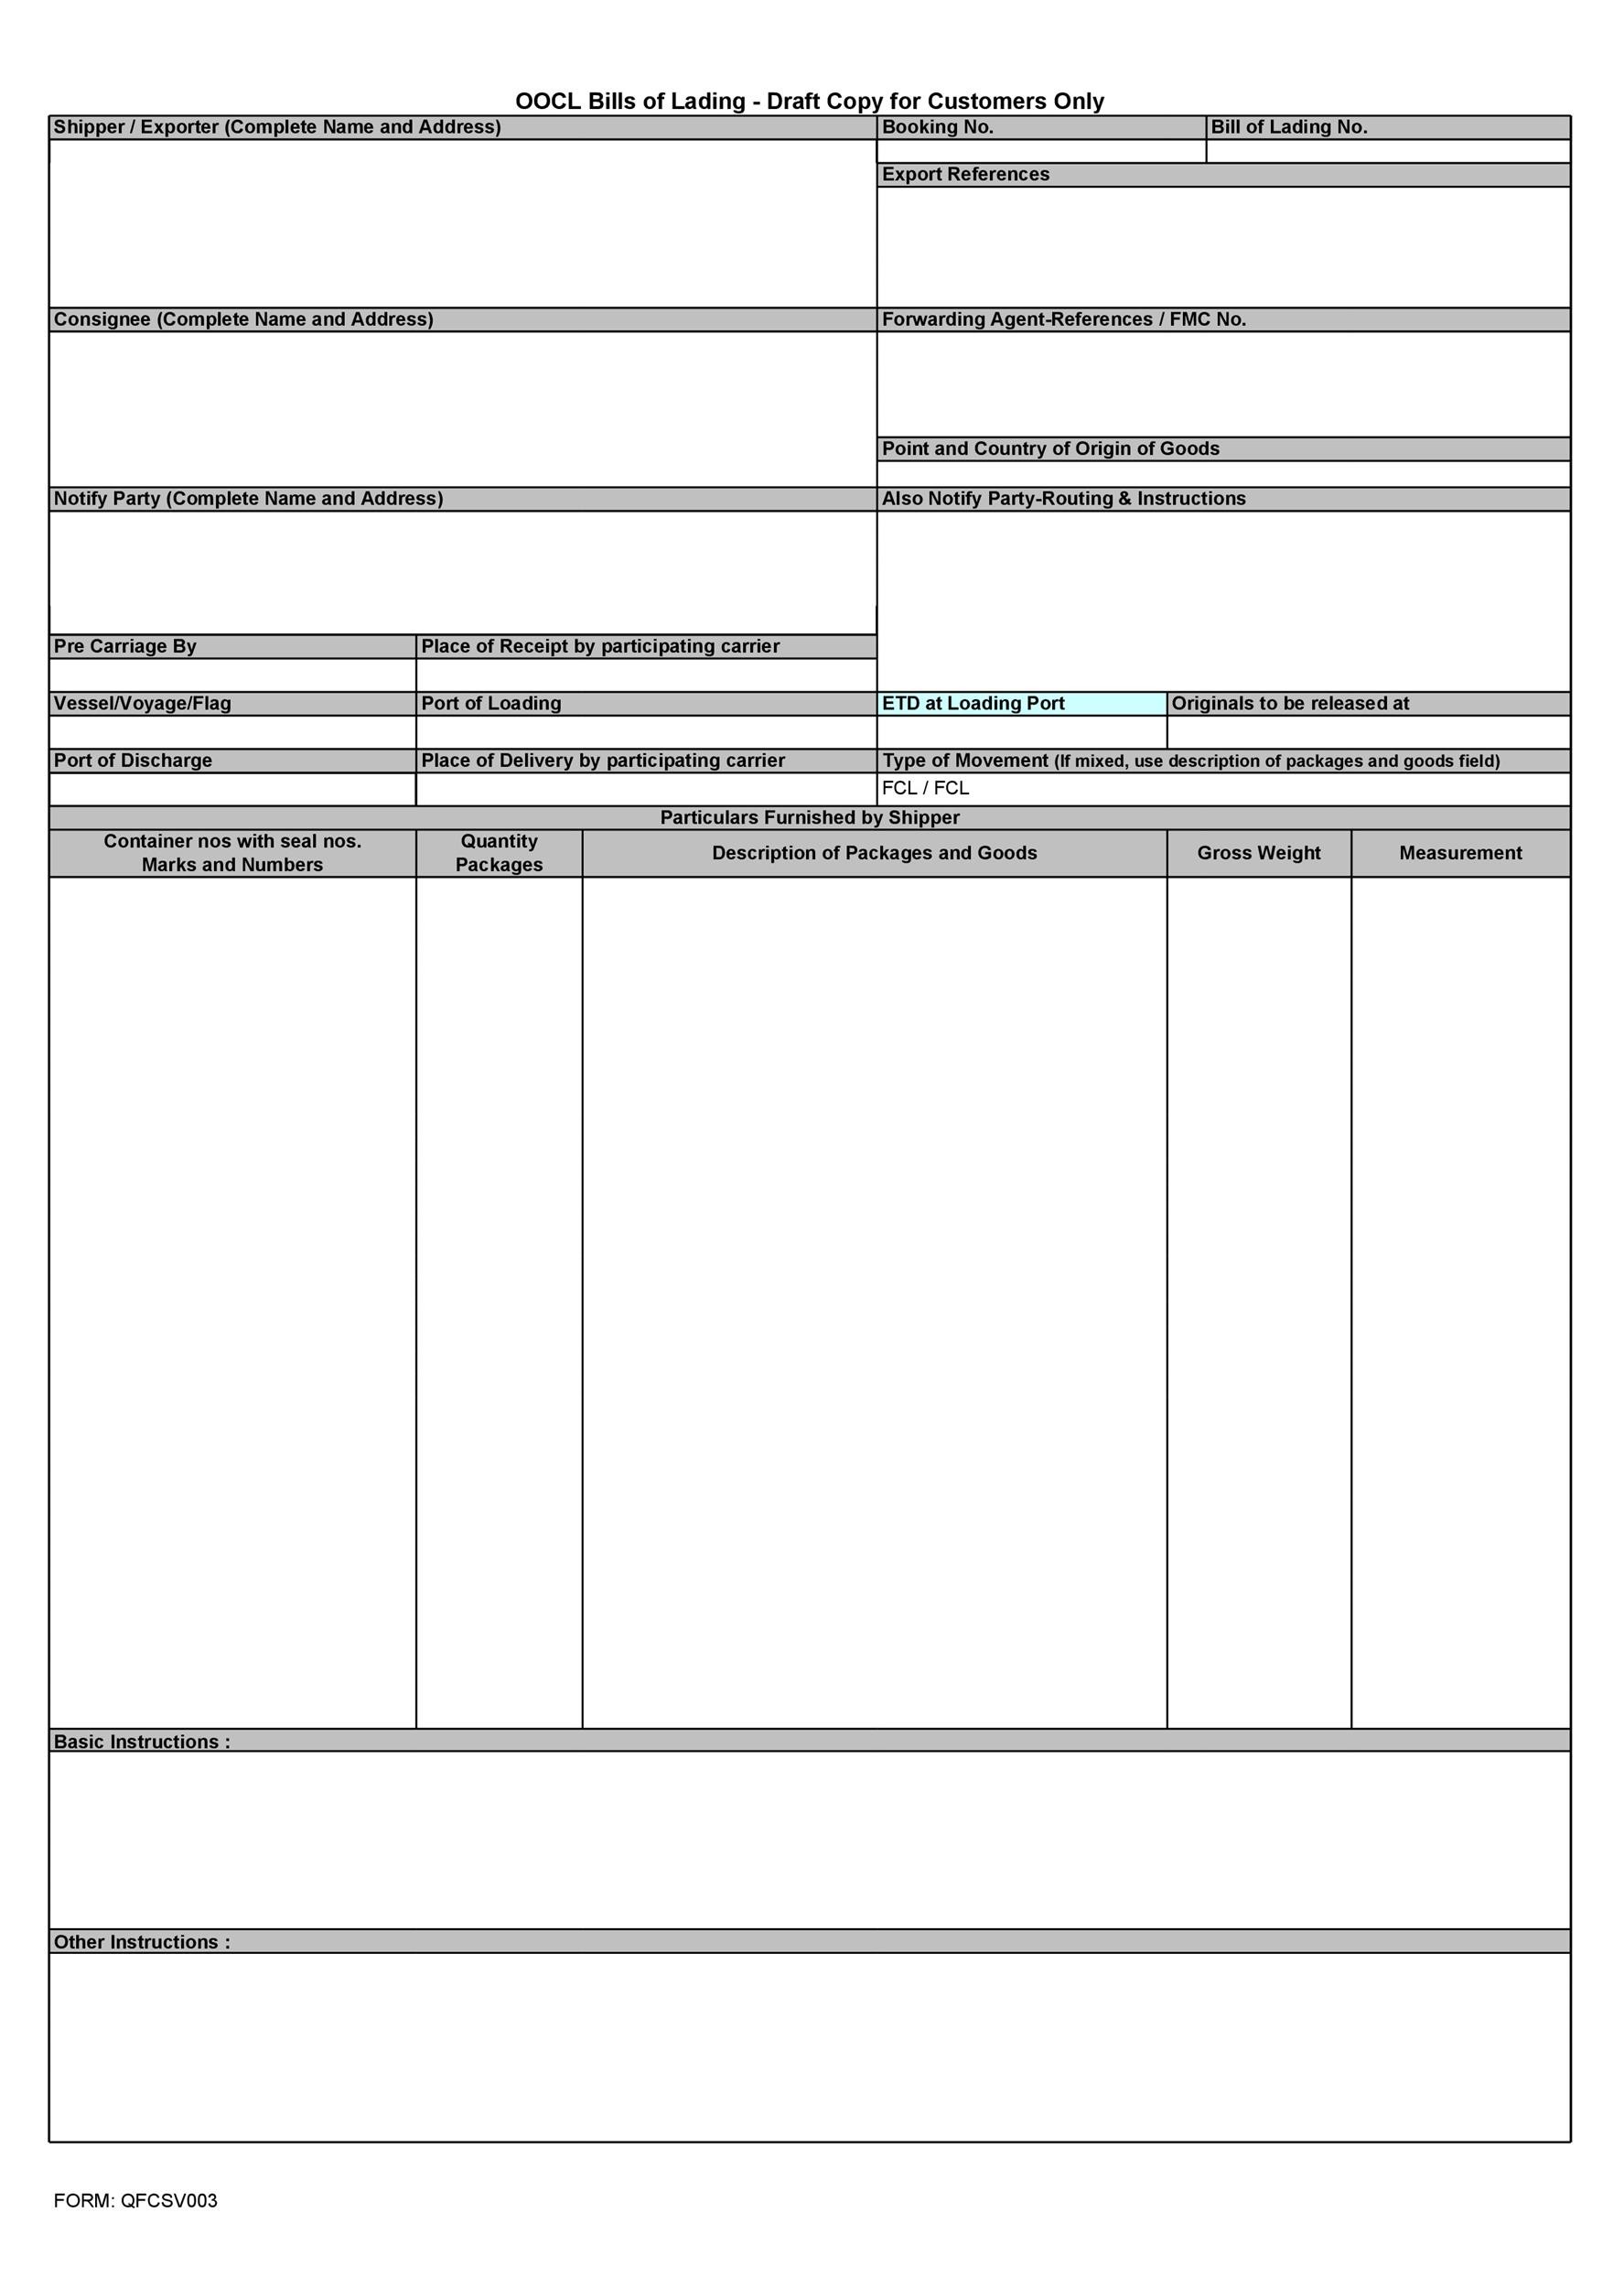 40 Free Bill of Lading Forms & Templates Template Lab